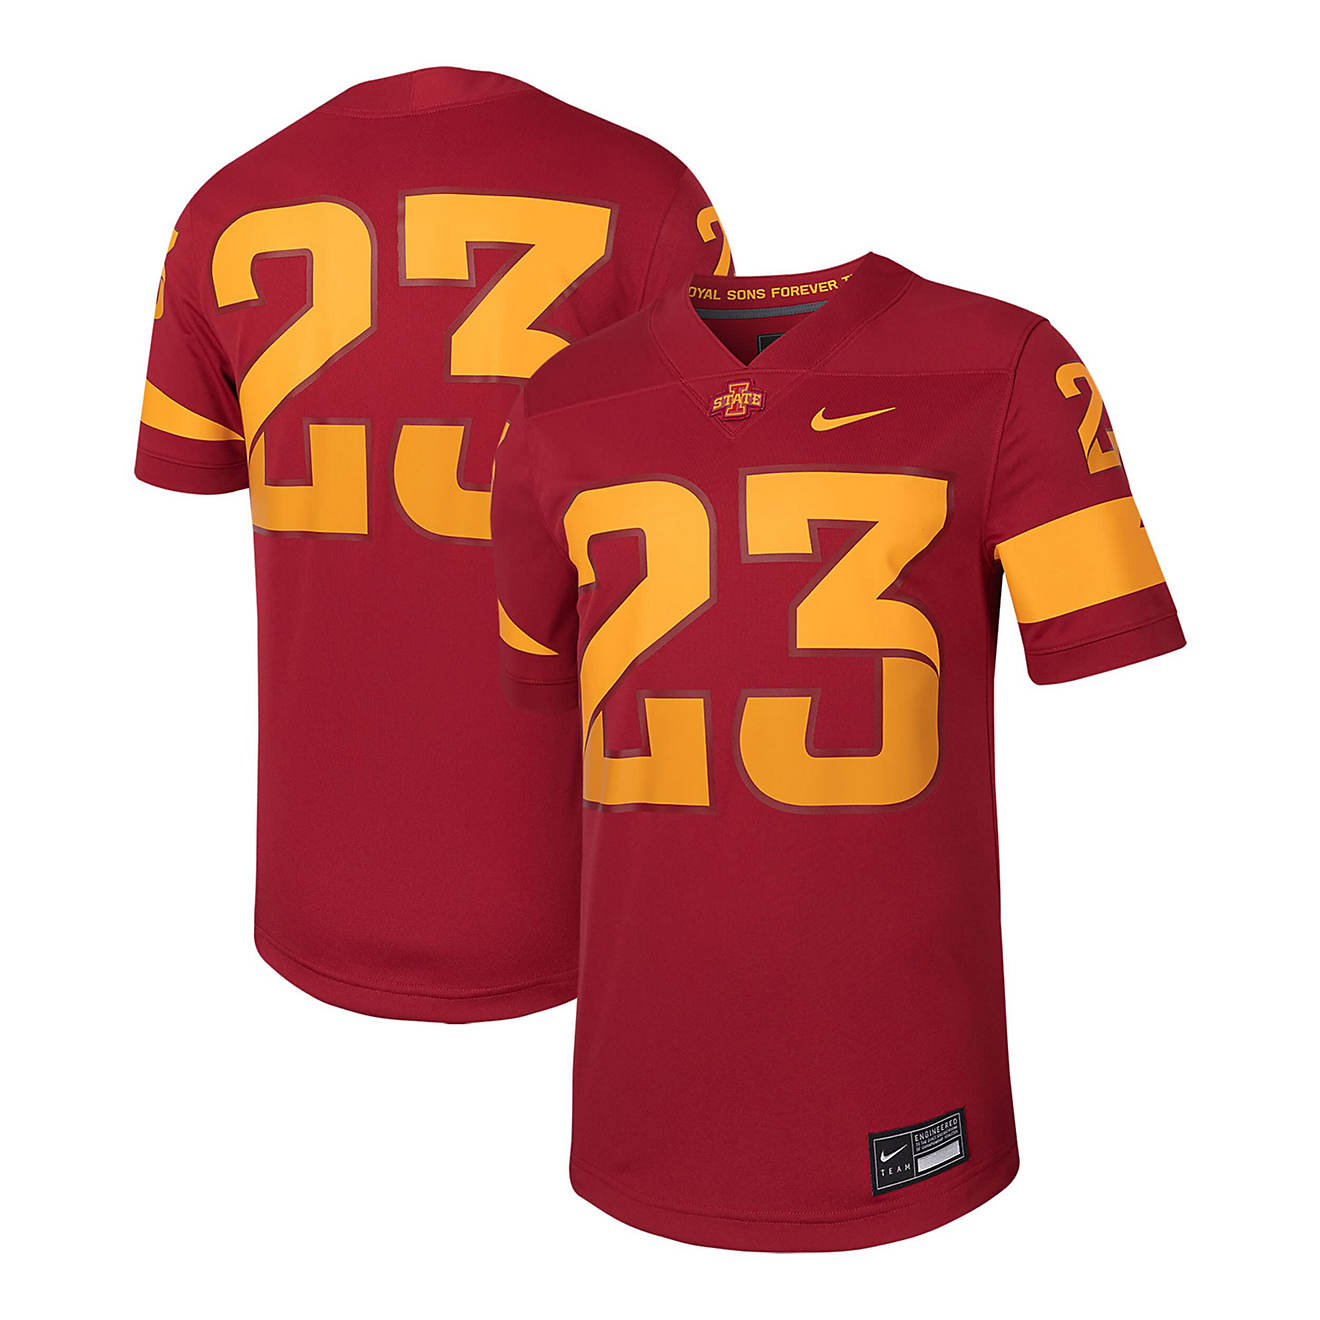 Nike 23 Iowa State Cyclones Untouchable Football Replica Jersey                                                                  - view number 1